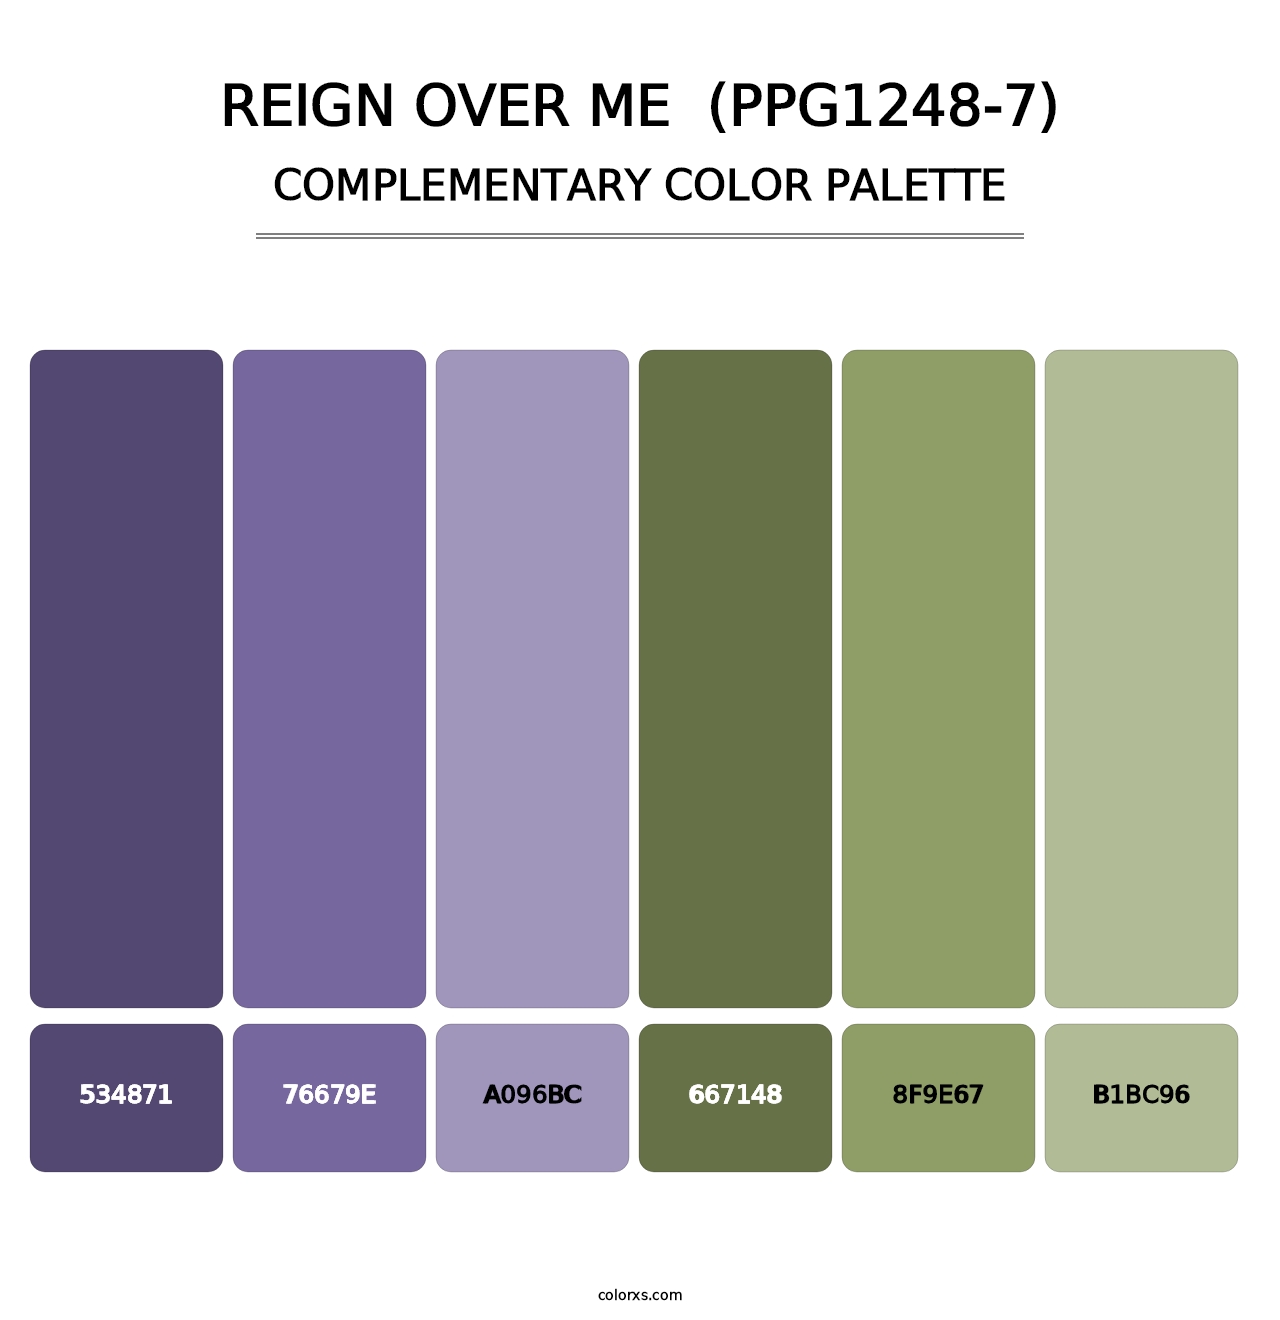 Reign Over Me  (PPG1248-7) - Complementary Color Palette